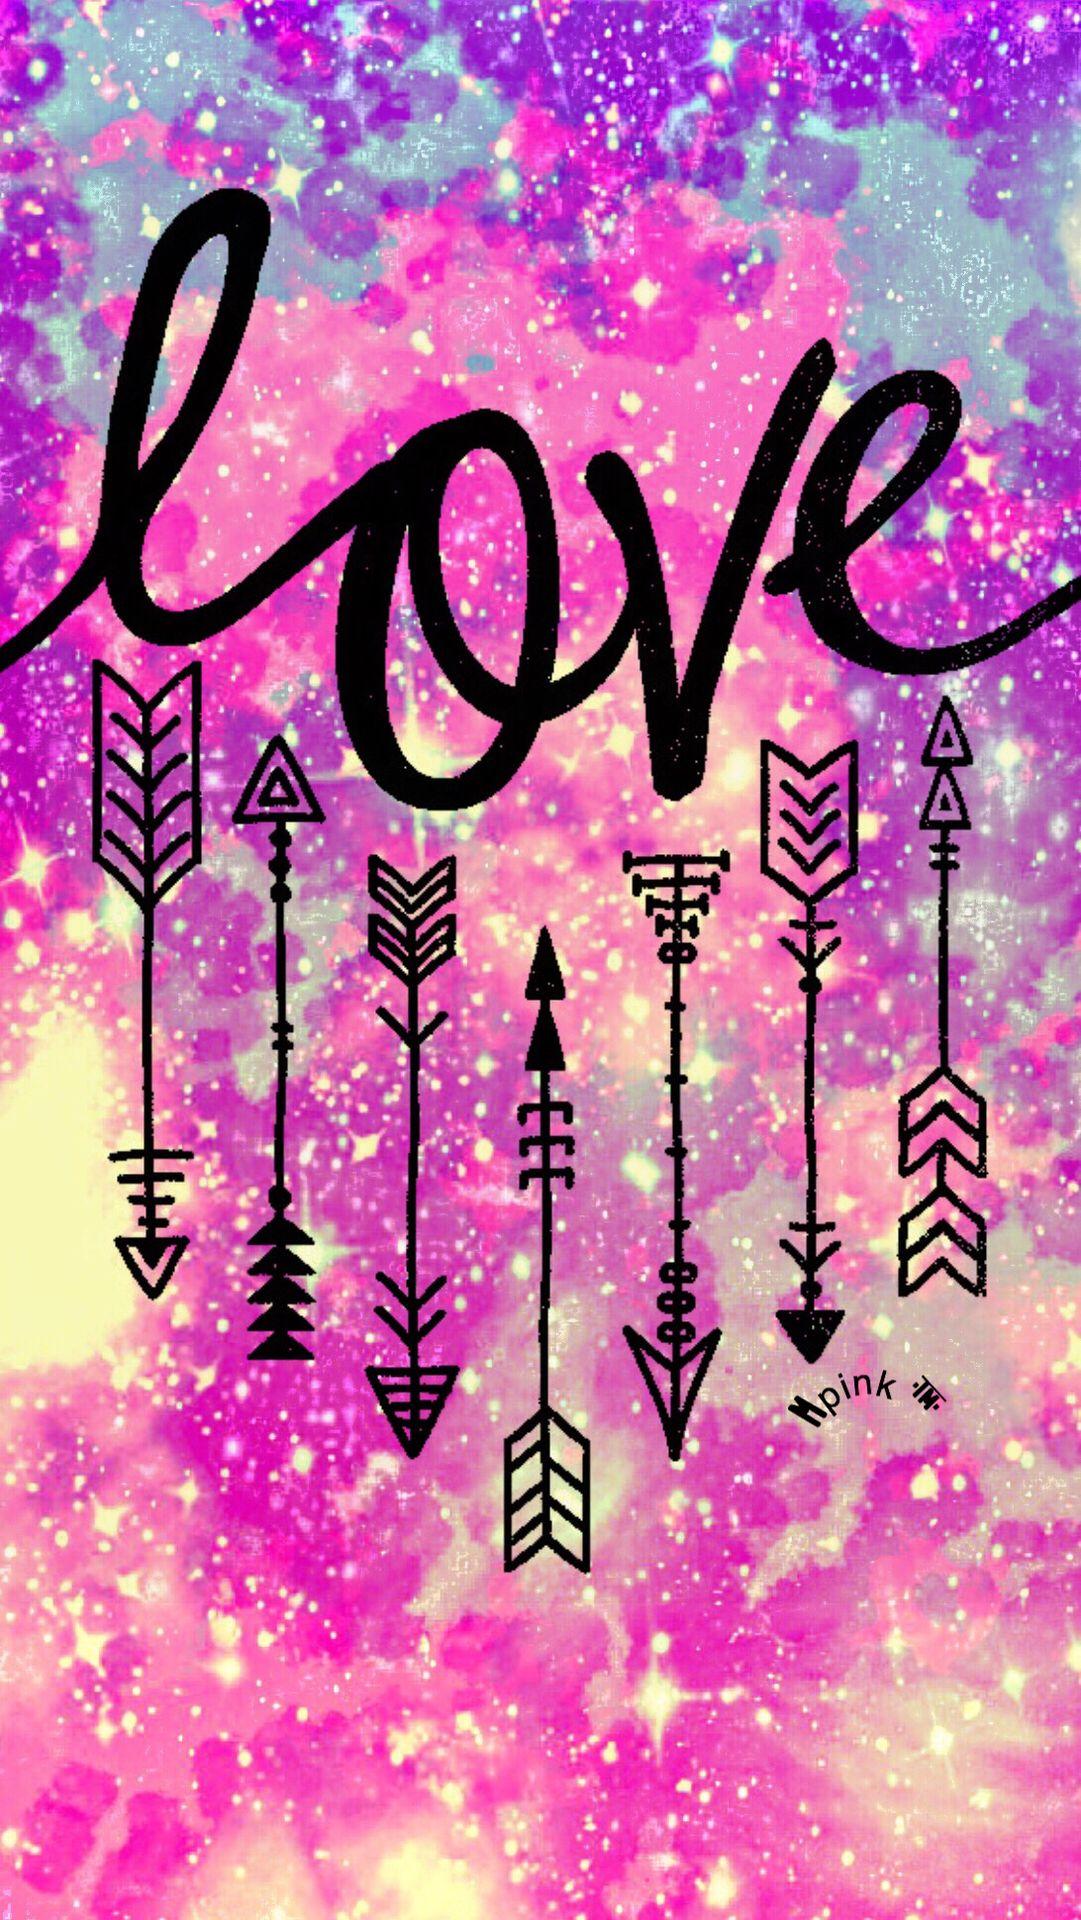 Love Hipster Arrows Galaxy IPhone Android Wallpaper. My